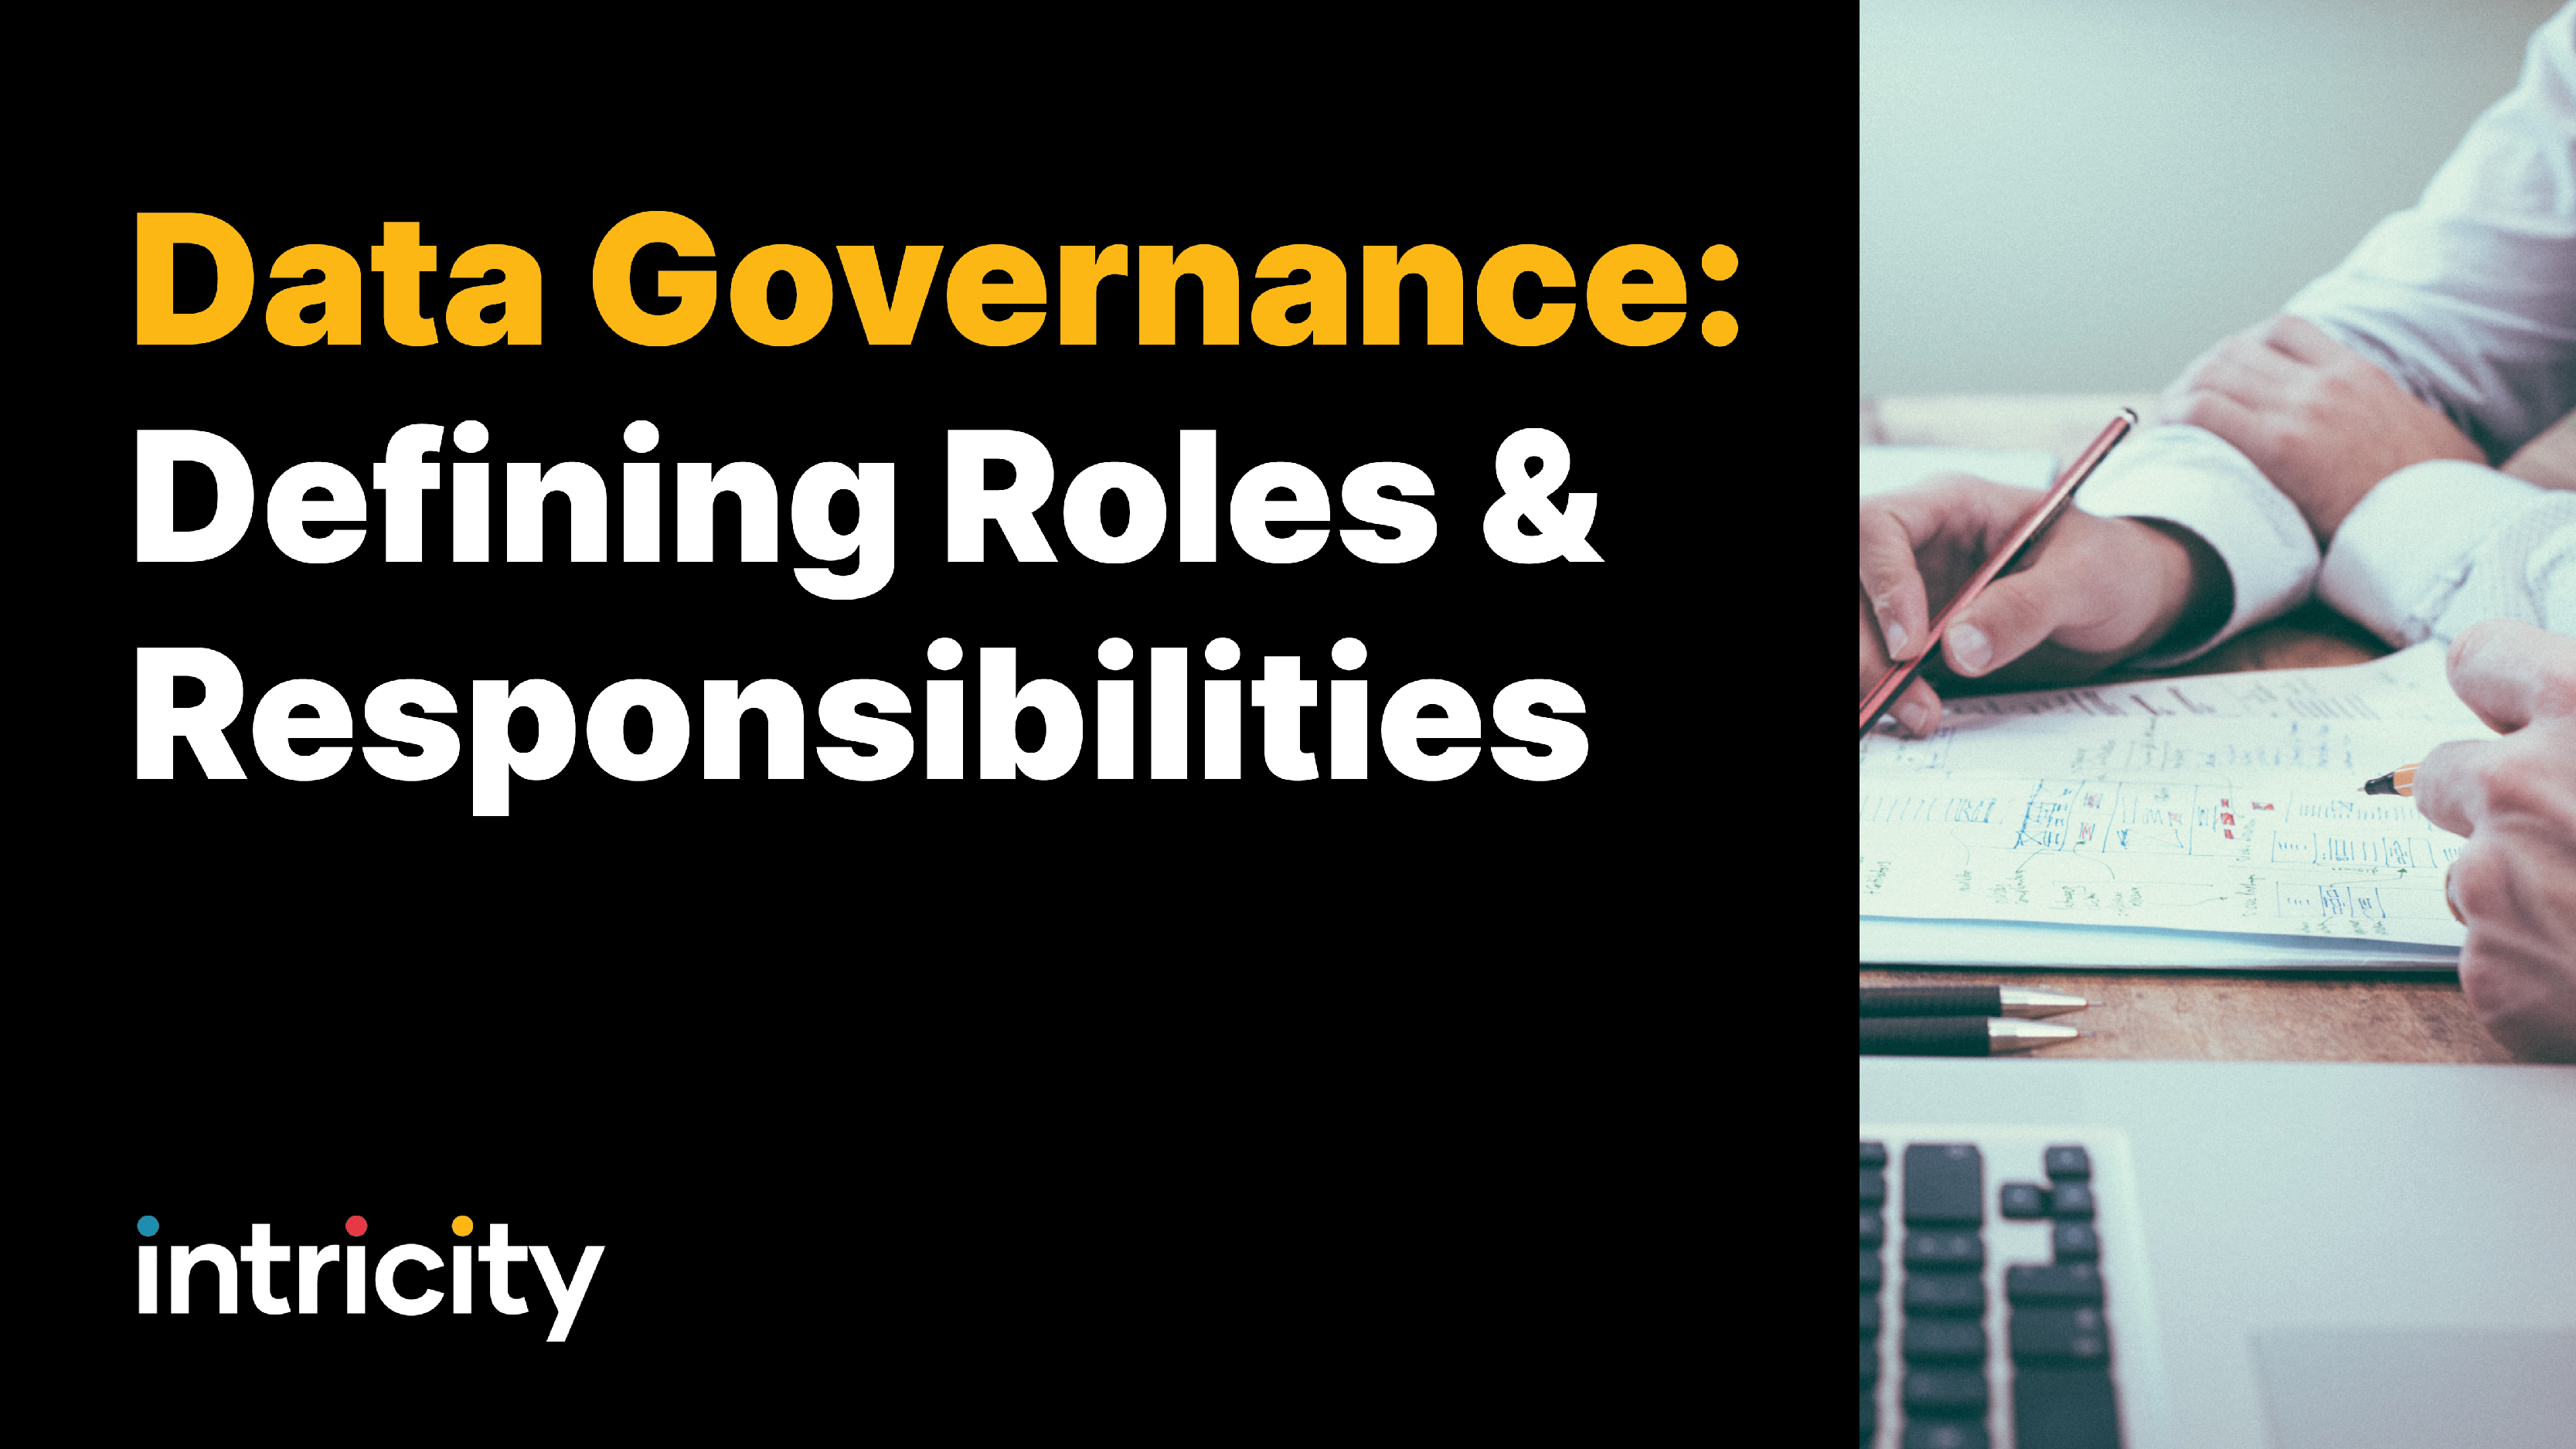 Data governance - defining roles and responsibilities